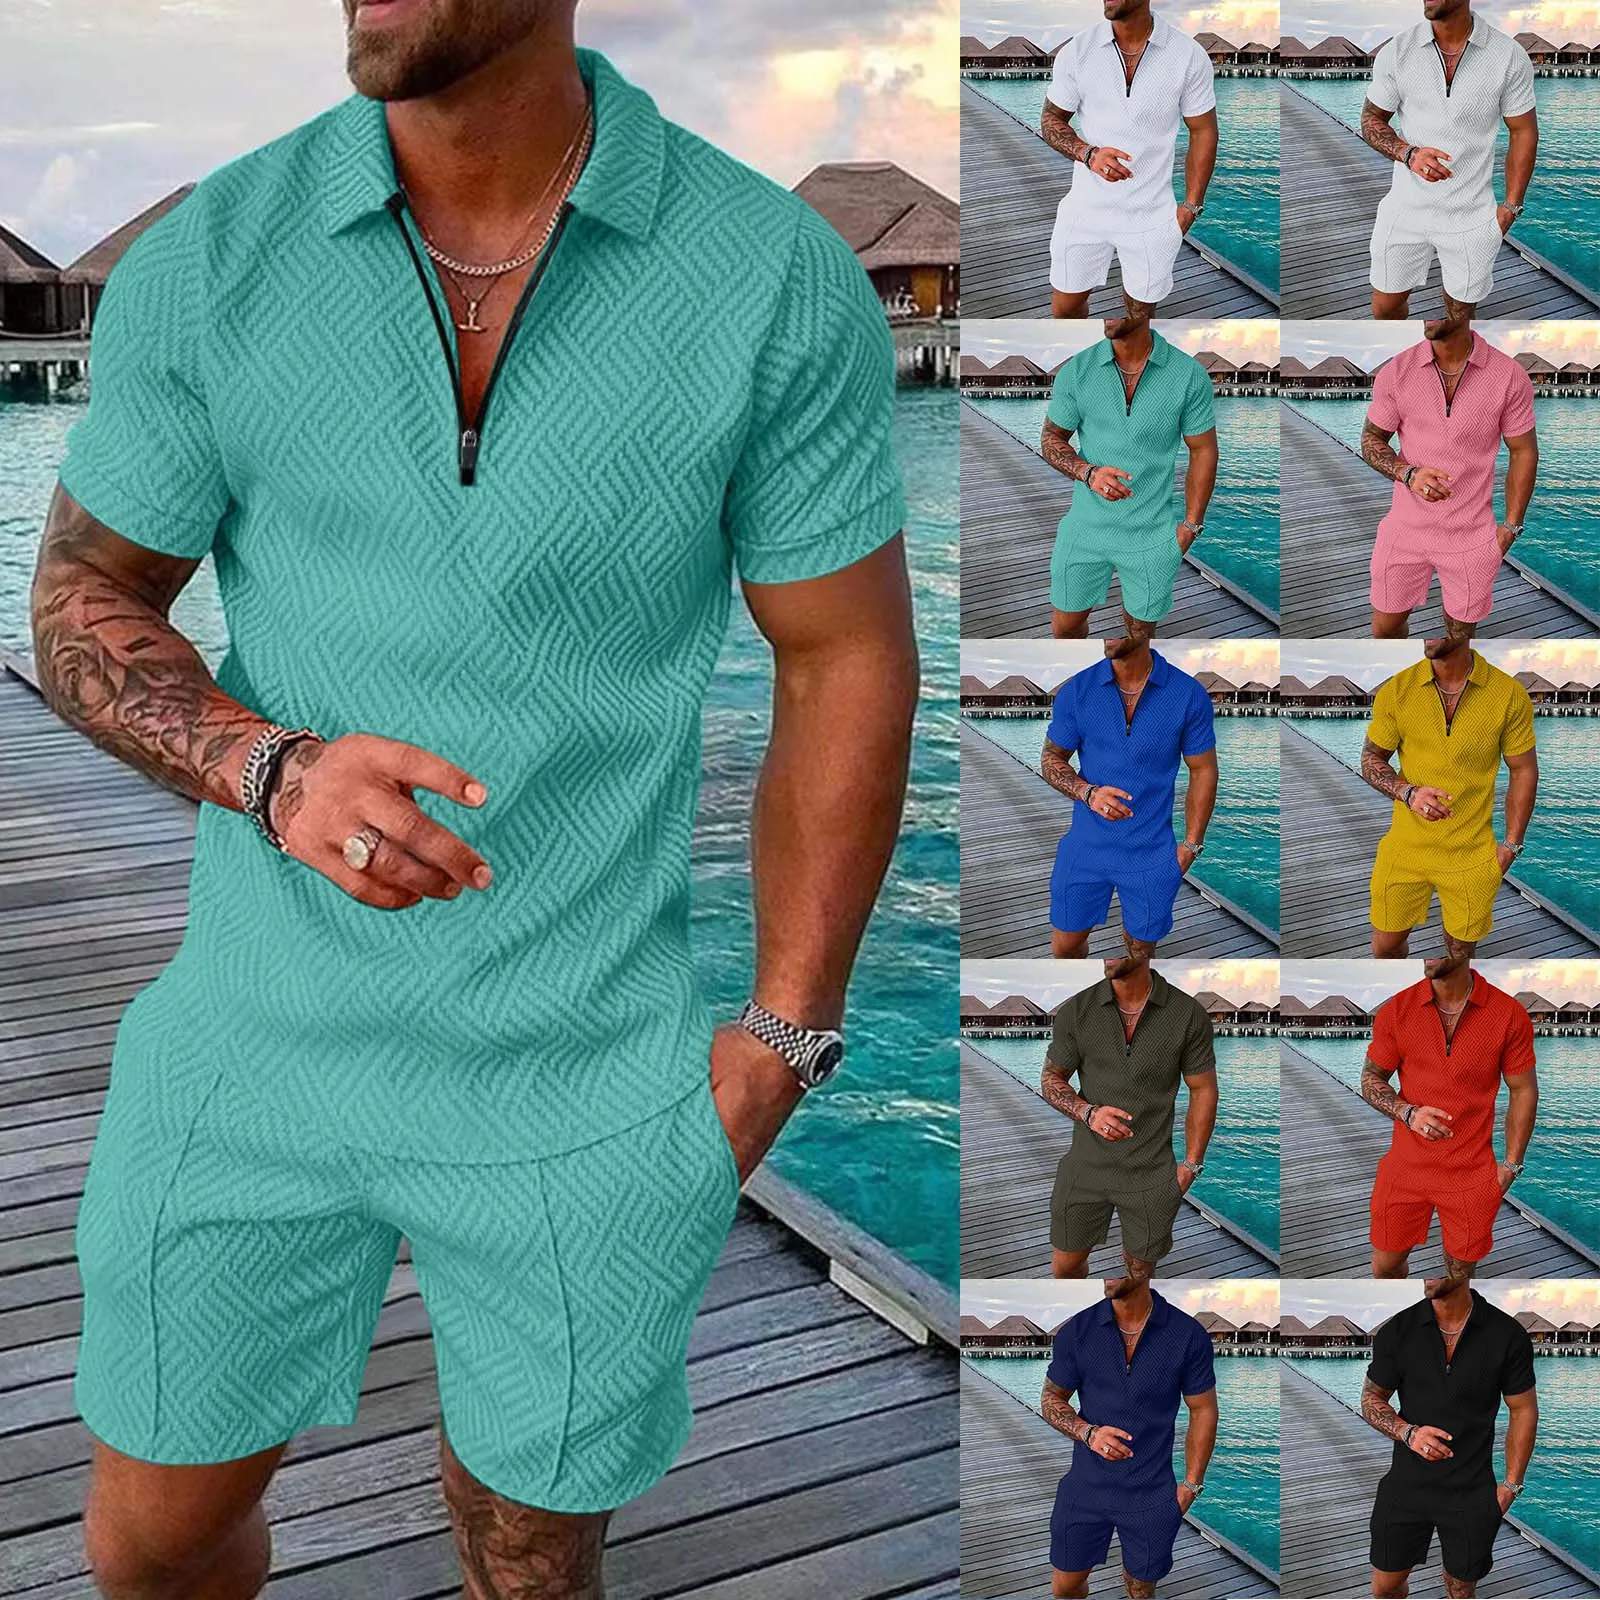 29 Styles Fashion  Men's Polo  Sets Mesh Printed 2023 Streetwear zipper Short Sleeve Shorts Two Pieces Men Casual Suit S-3XL incerun 2023 american style men s sets vacation hollowed mesh short sleeved shirt shorts casual see through two piece sets s 5xl